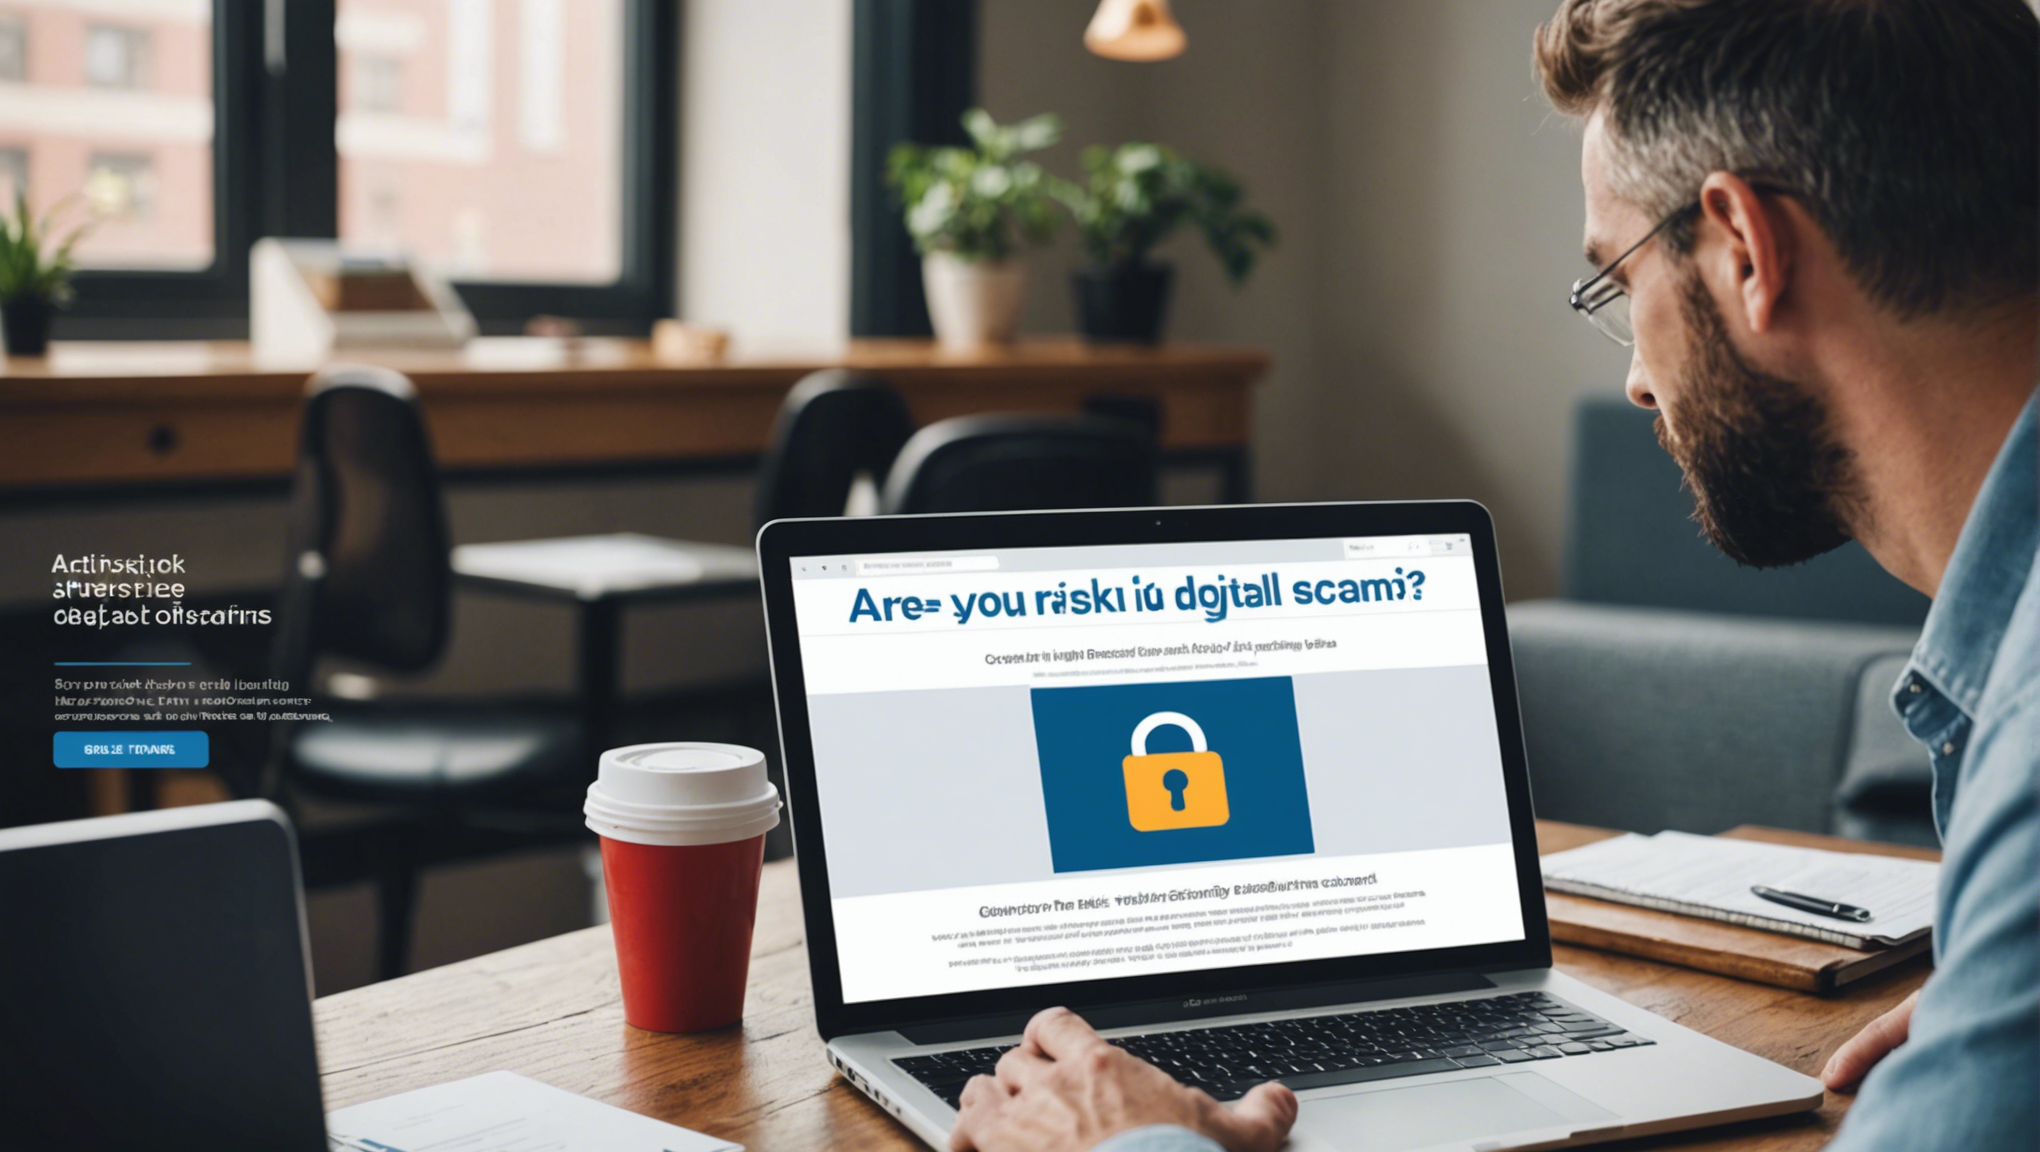 learn about the $5 billion digital scam risk americans face and how to protect yourself from digital scams.